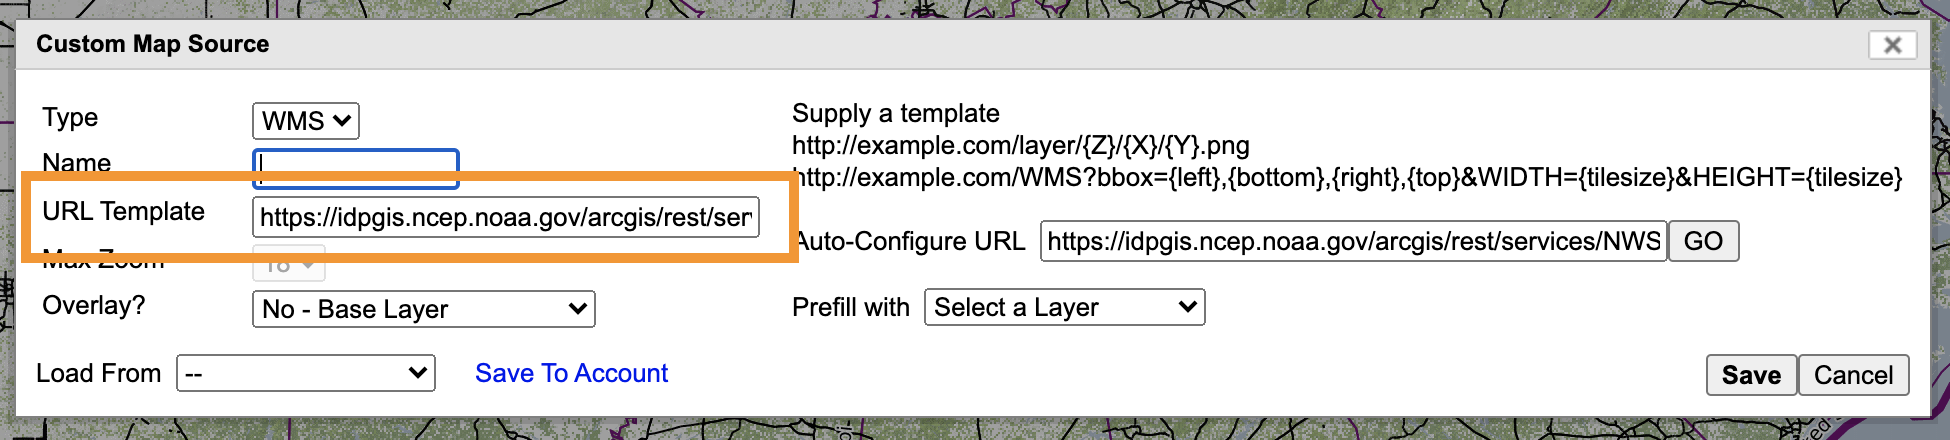 in the custom source edit box, the field for URL template has an orange box around it to make it obvious